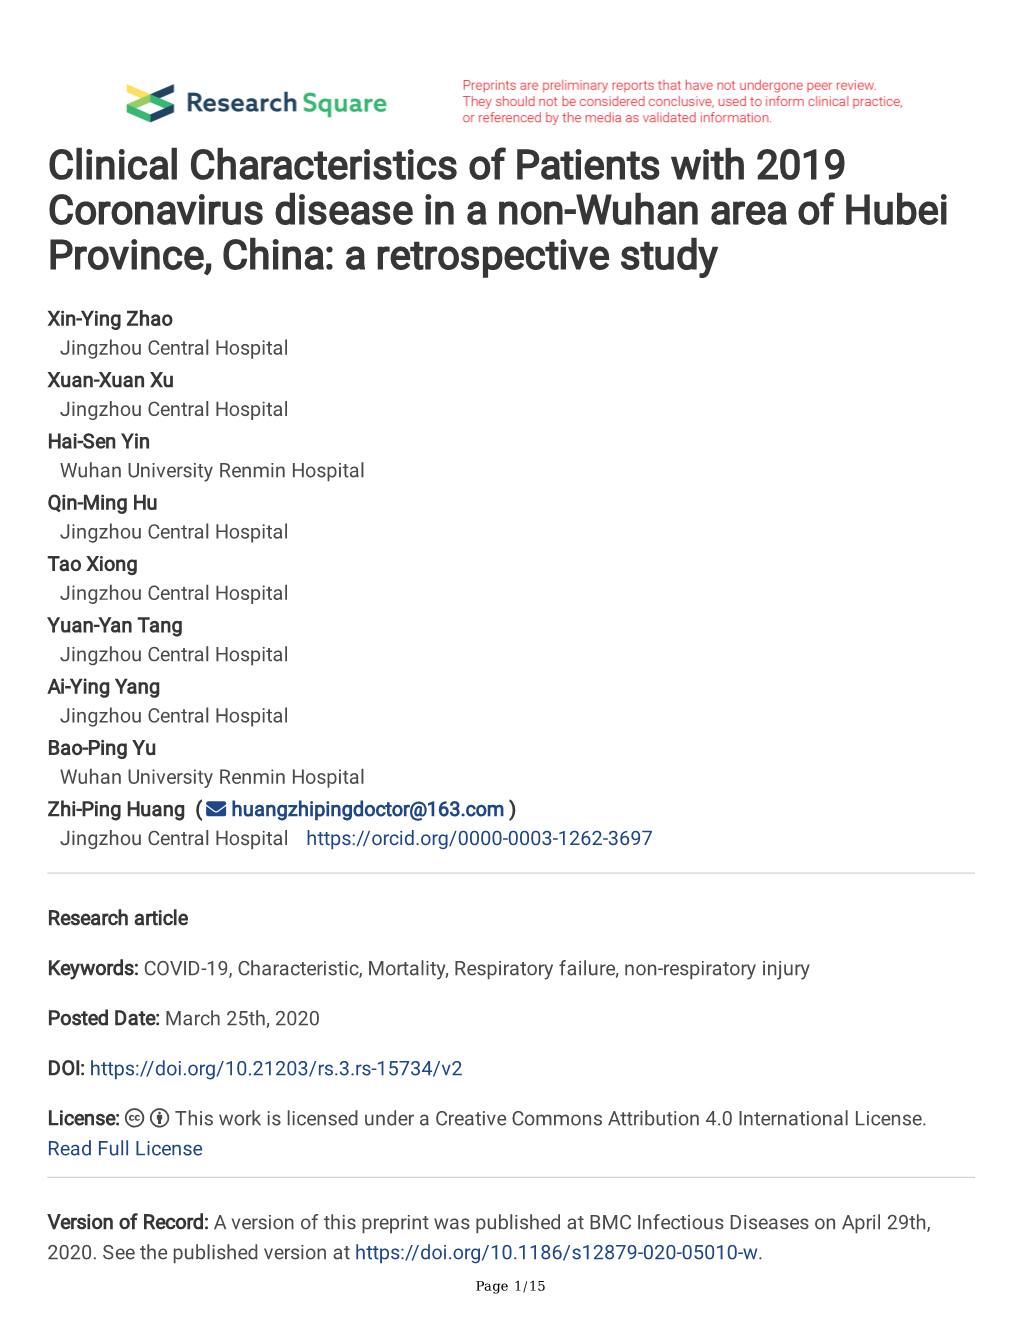 Clinical Characteristics of Patients with 2019 Coronavirus Disease in a Non-Wuhan Area of Hubei Province, China: a Retrospective Study